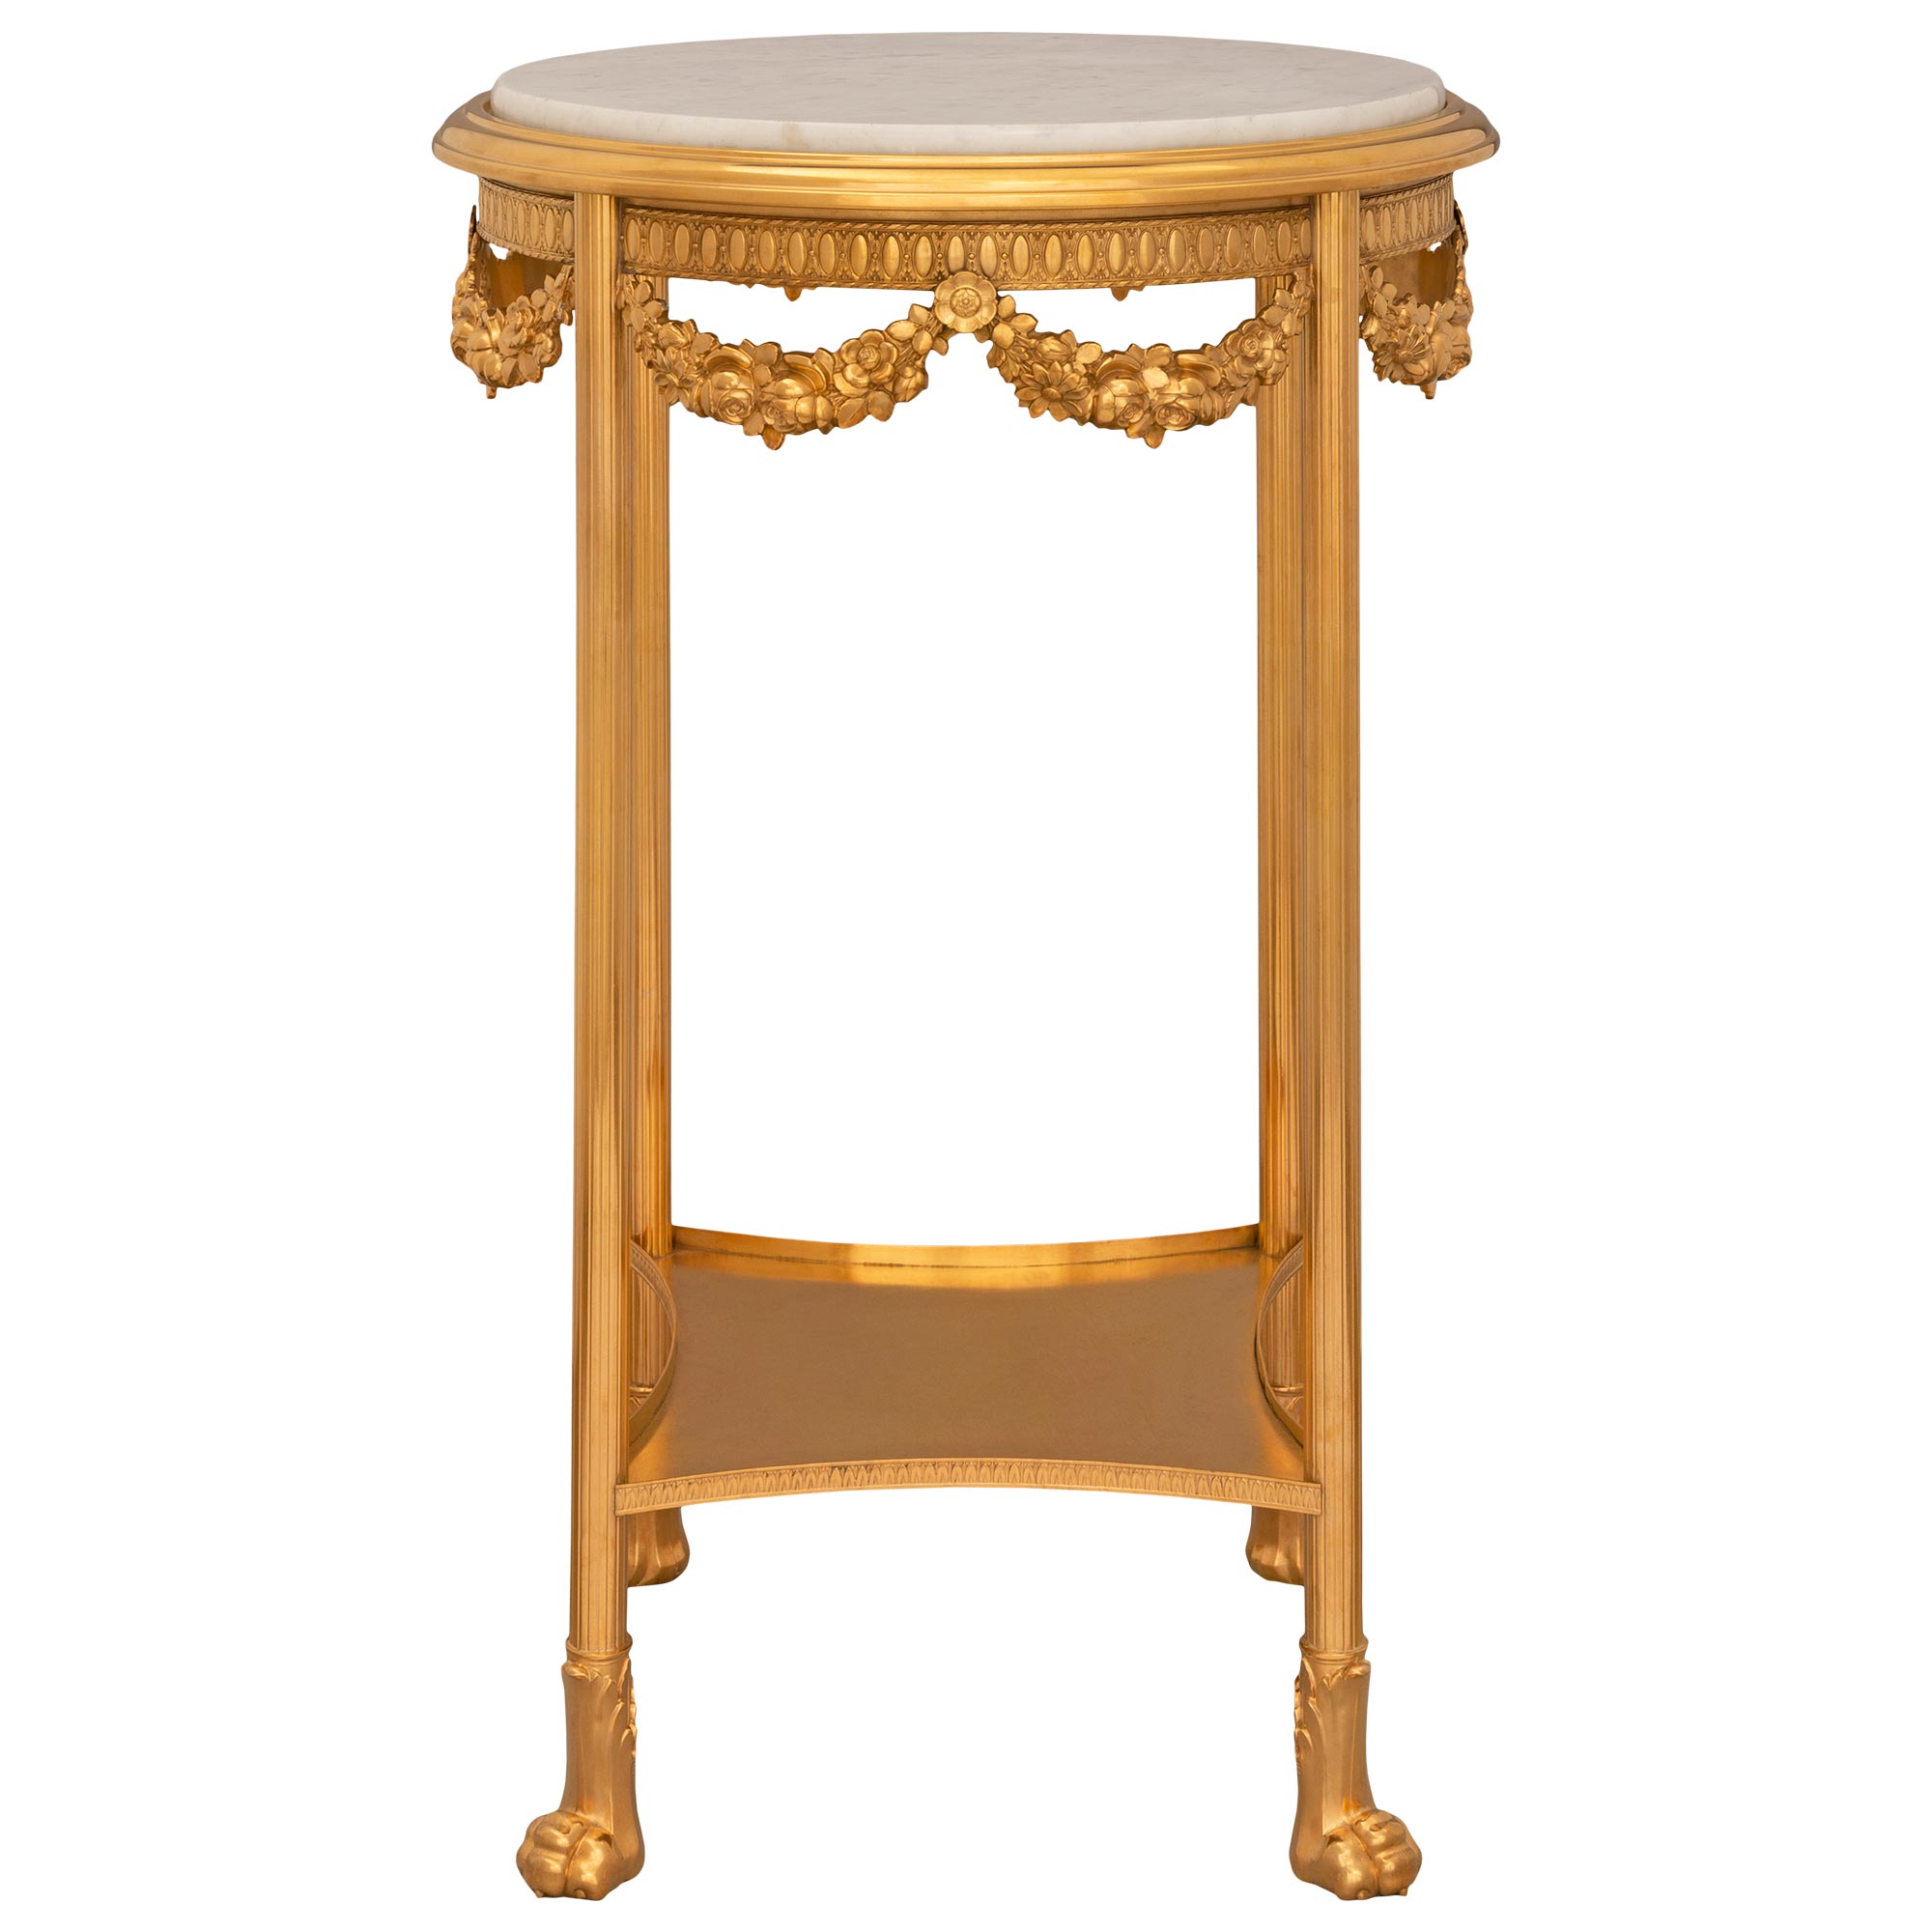 French 19th Century Belle Époque Period Marble and Ormolu Side Table